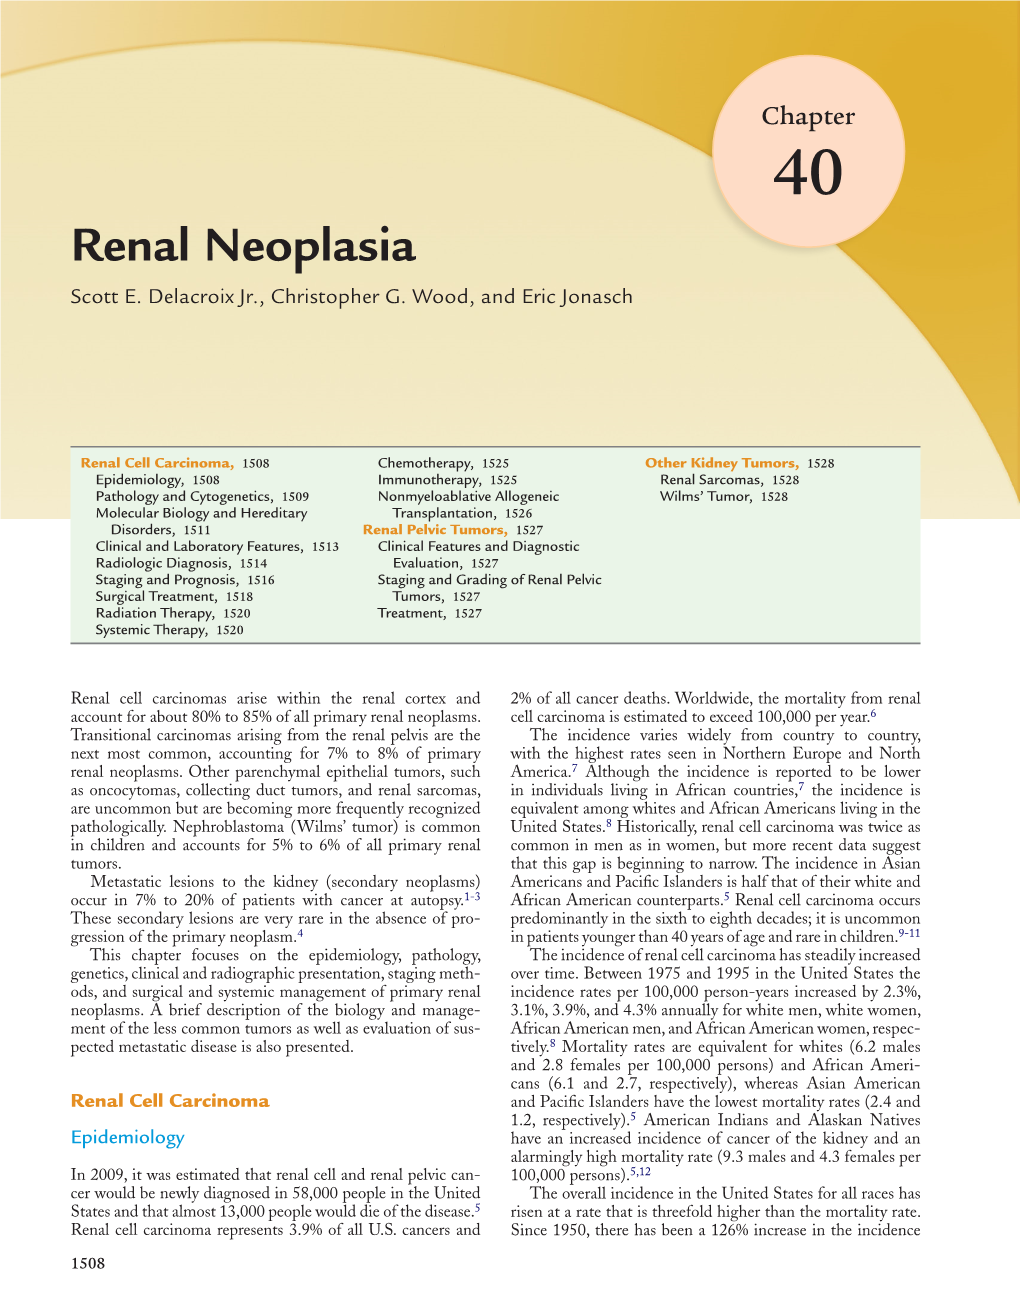 Chapter 40 – Renal Neoplasia